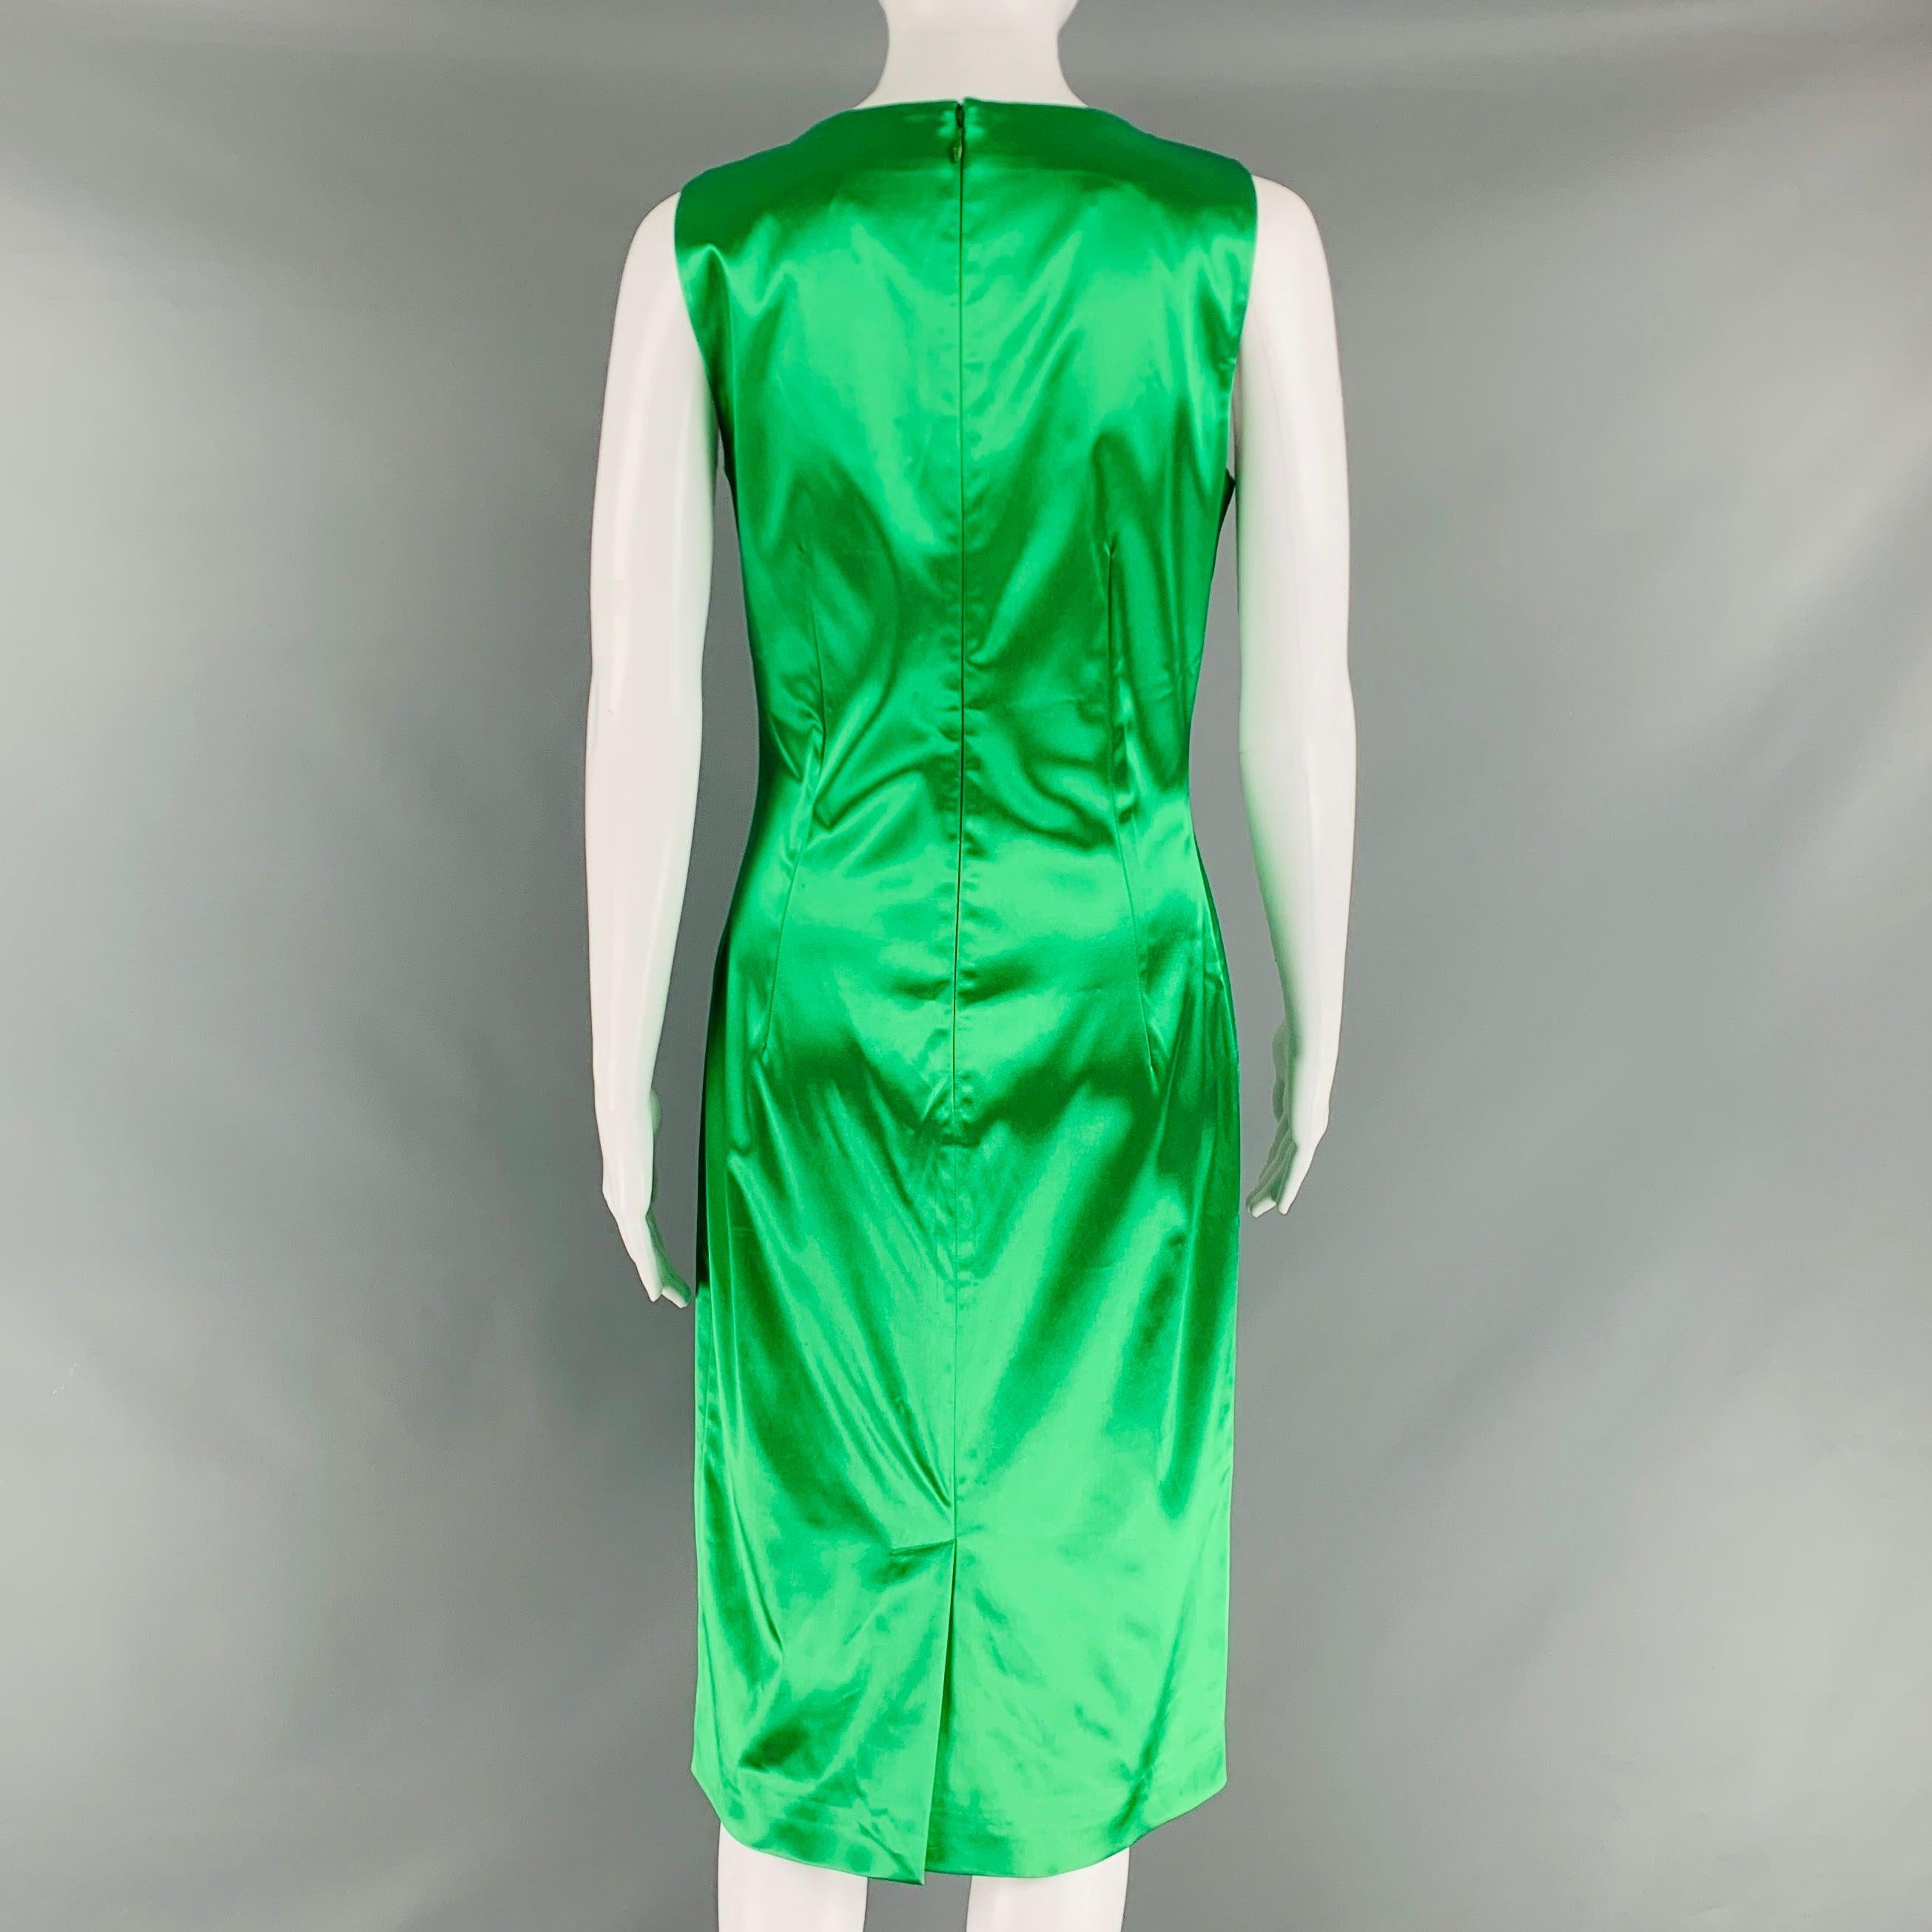 DOLCE & GABBANA Size 8 Green Acetate Blend Sleeveless Mid-Calf Cocktail Dress In Good Condition For Sale In San Francisco, CA